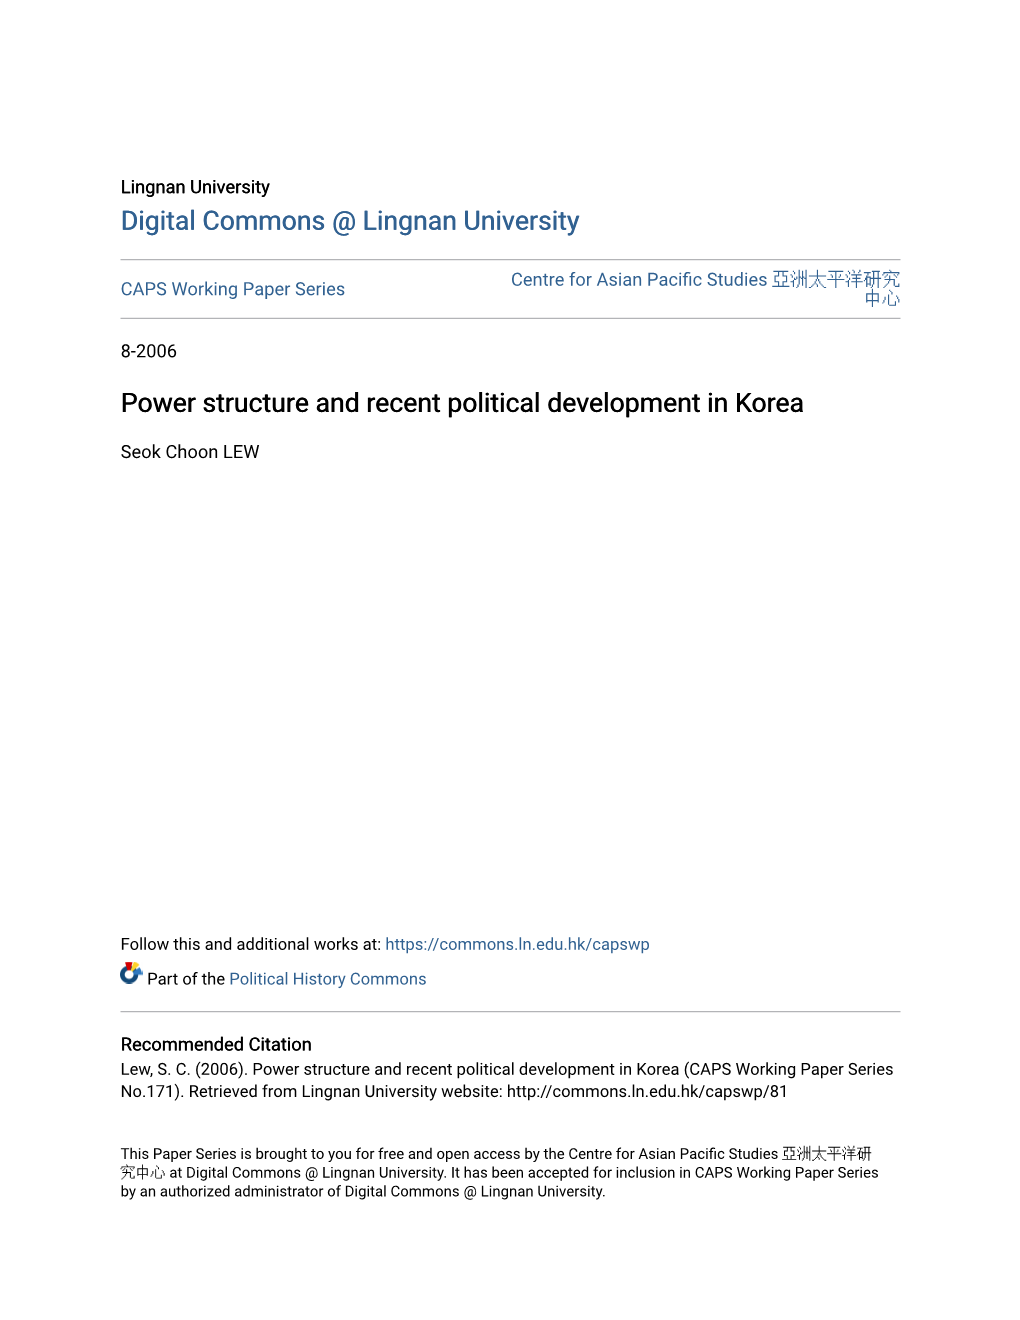 Power Structure and Recent Political Development in Korea